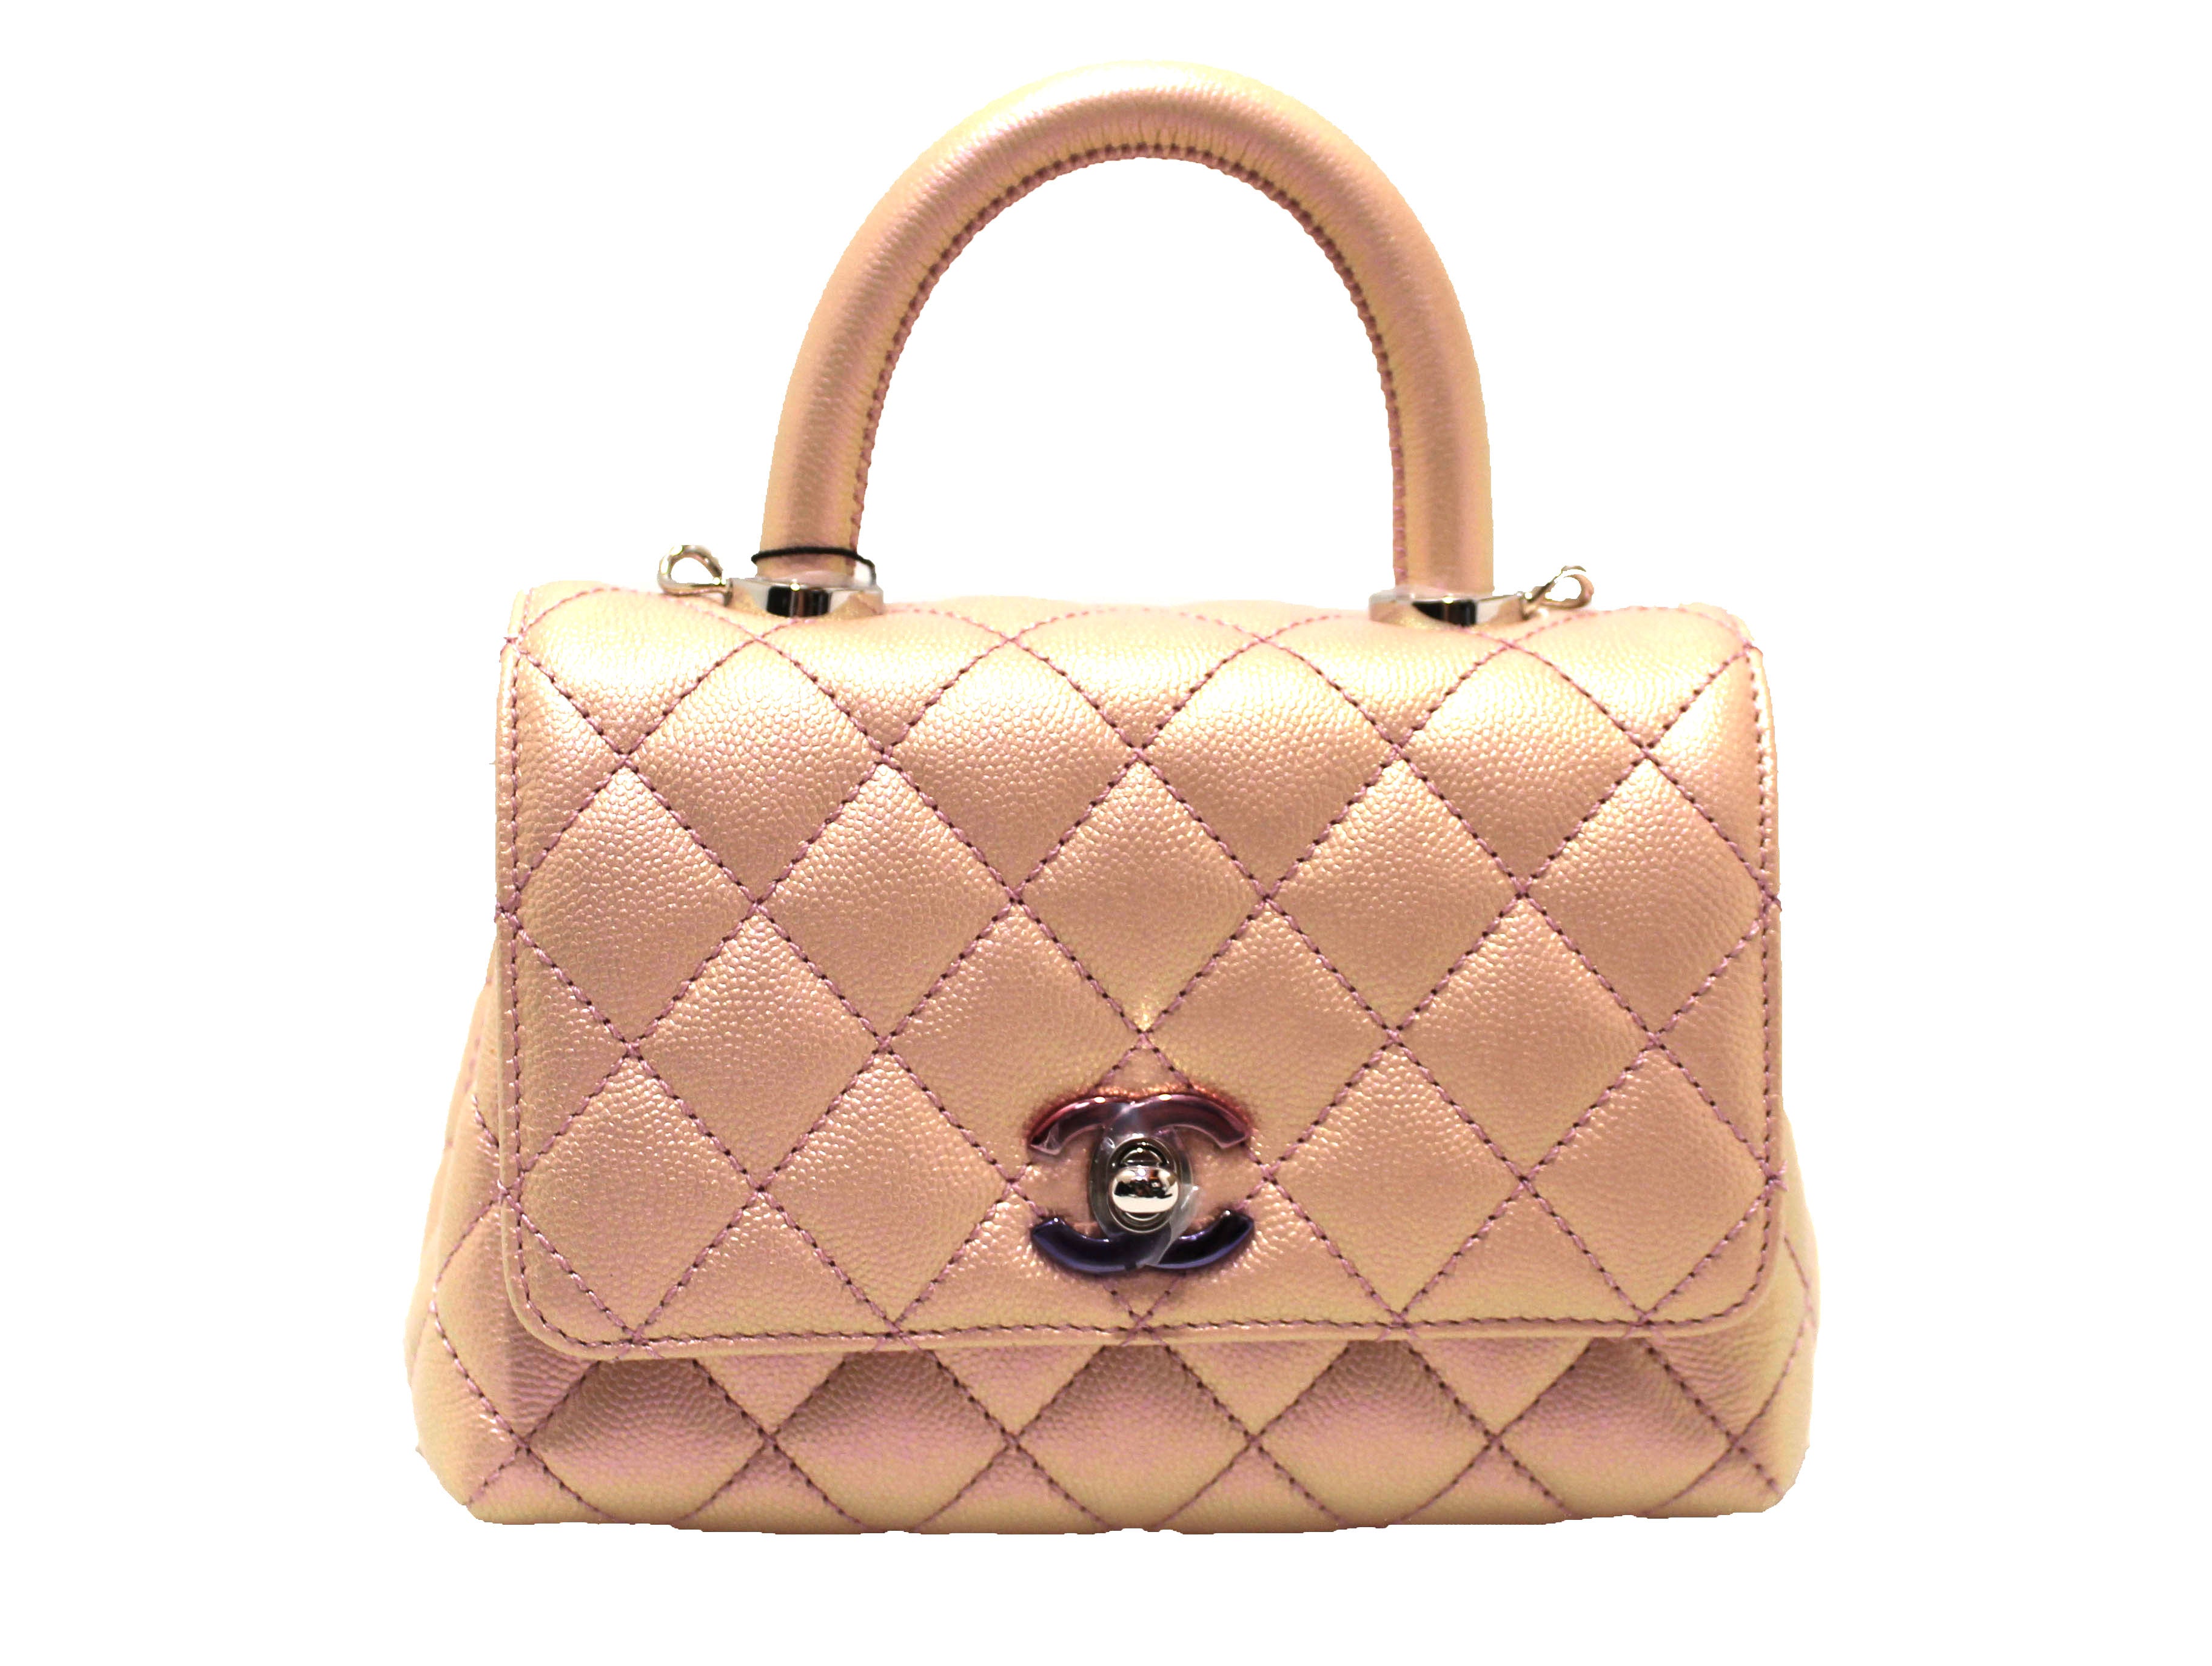 Chanel Dark Brown Quilted Caviar Leather Mini Coco Handle Bag